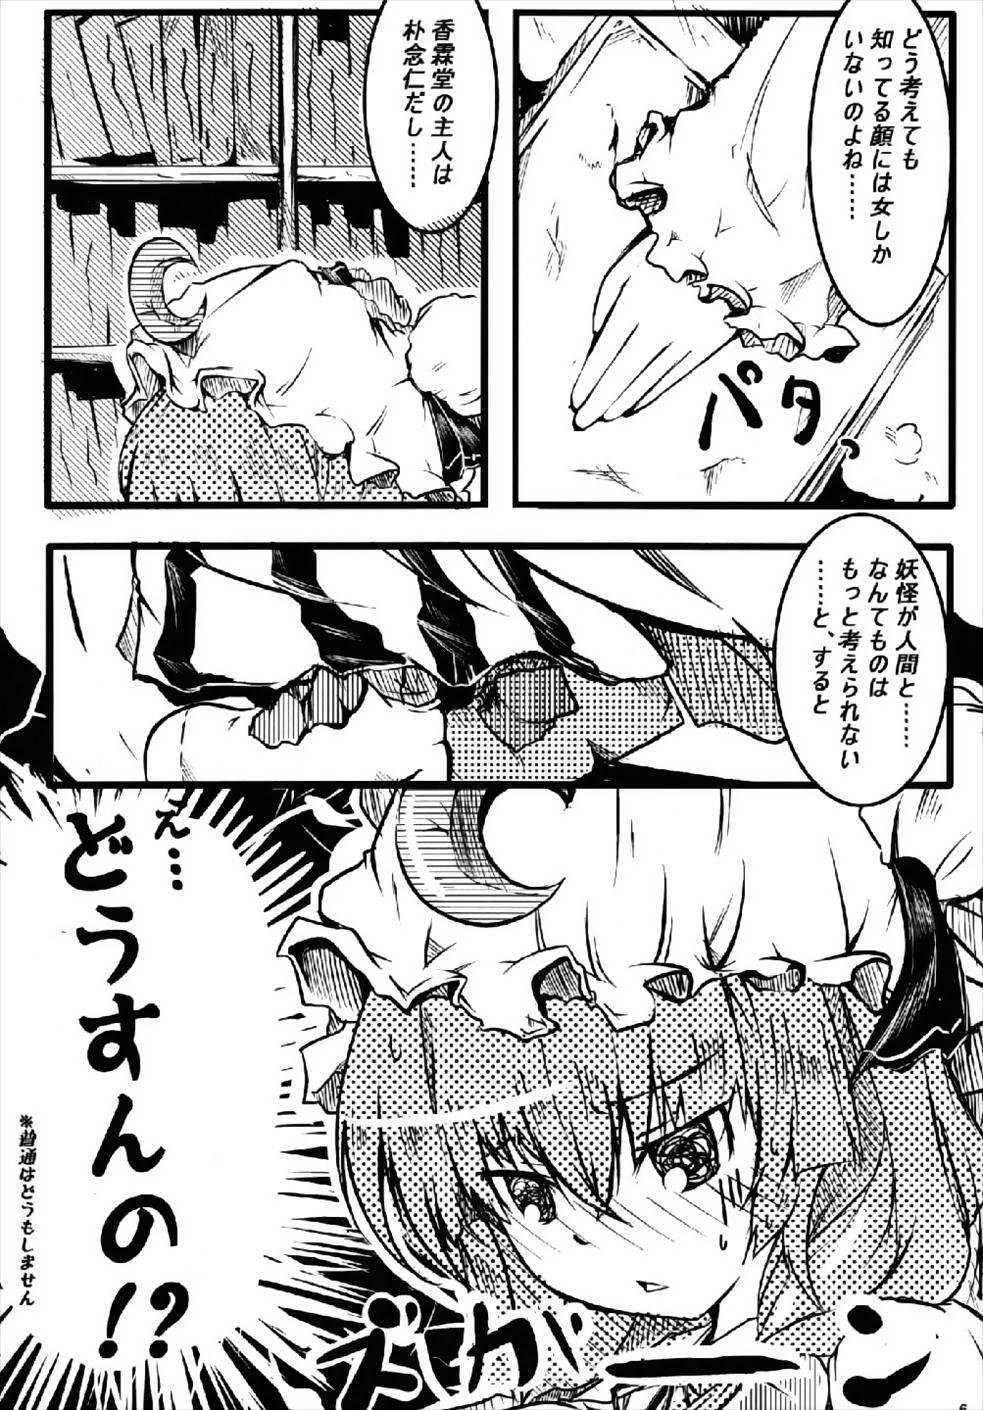 Toilet RemiFlaPatche! - Touhou project Teamskeet - Page 5